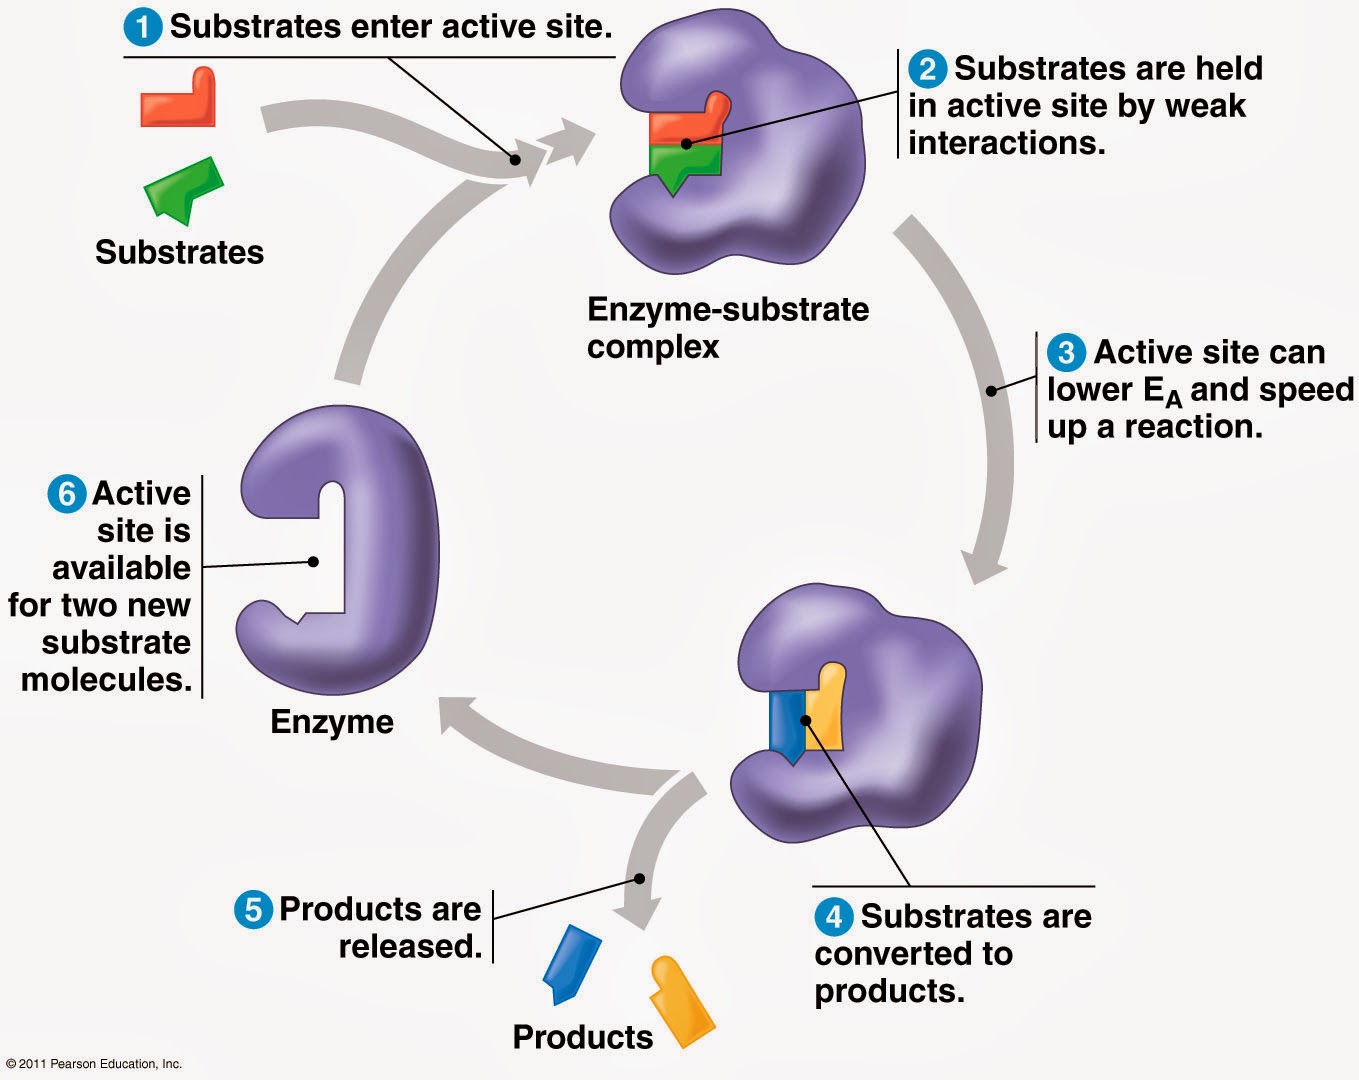 Action site. Catalase Enzyme. Enzyme substrate interaction. TCA Cycle Enzymes. PRPP Enzyme.